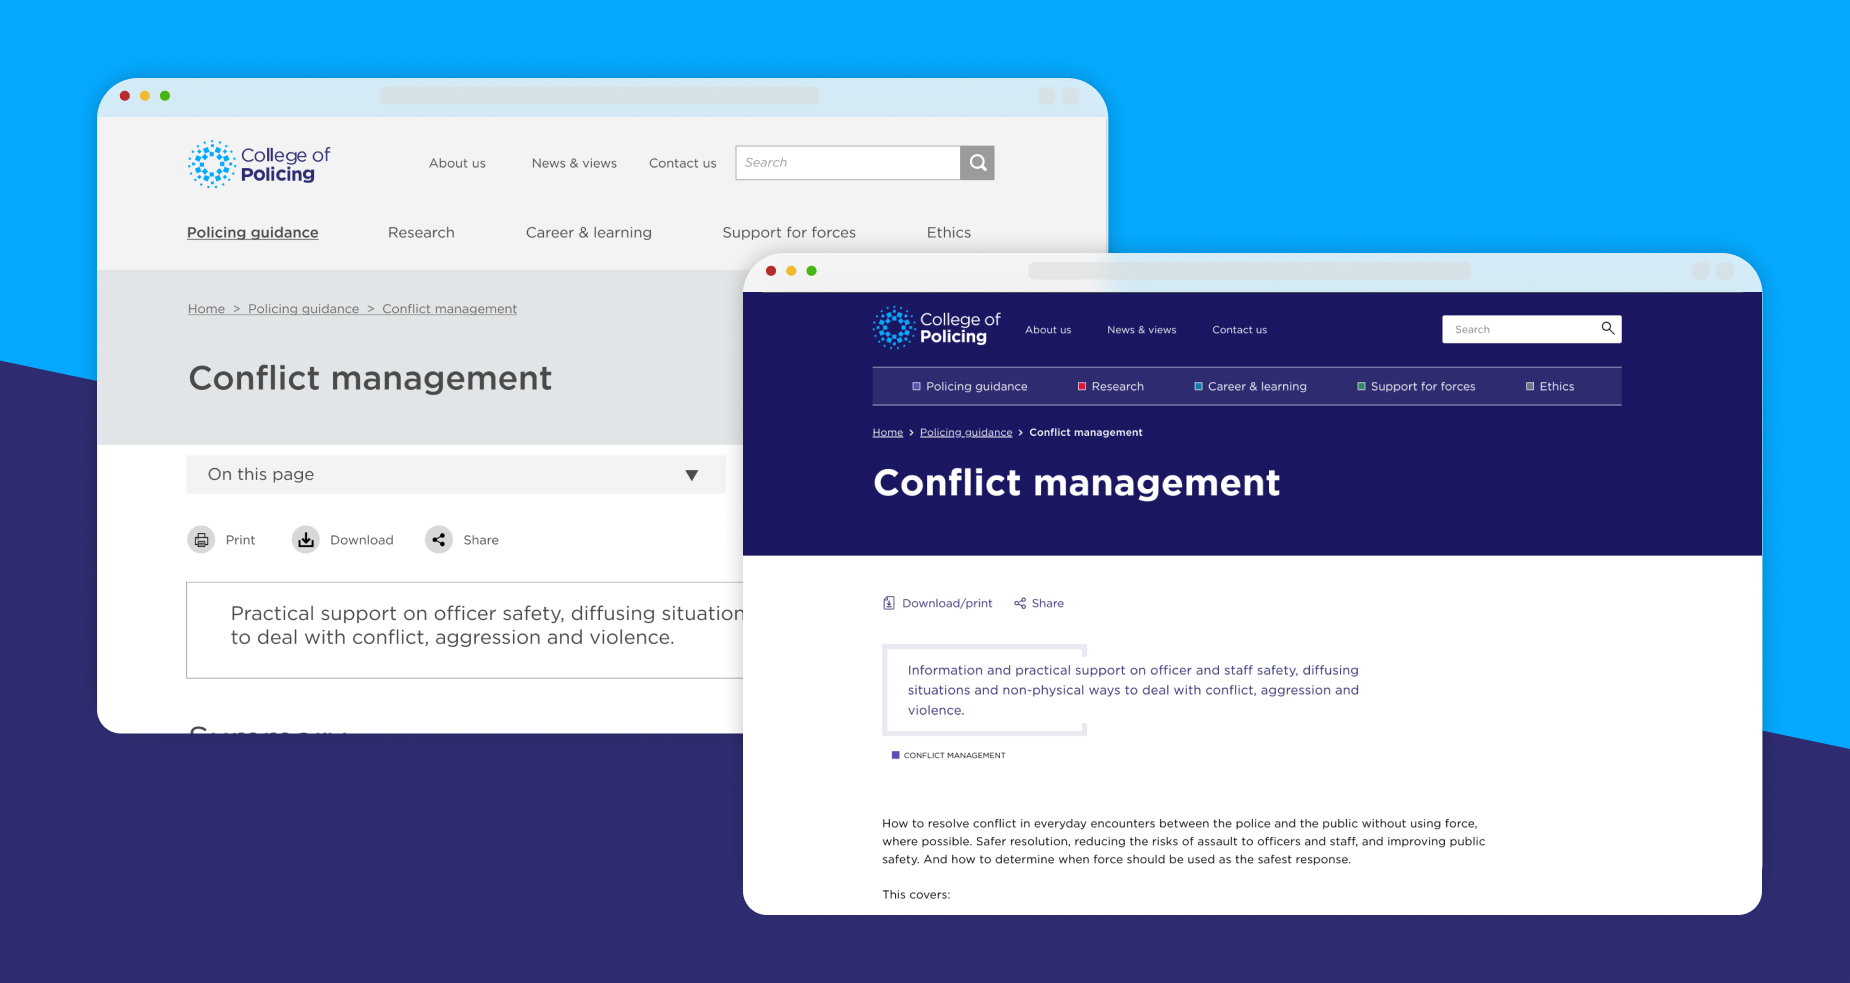 Screenshots of the "Conflict Management" page from the new College of Policing website.